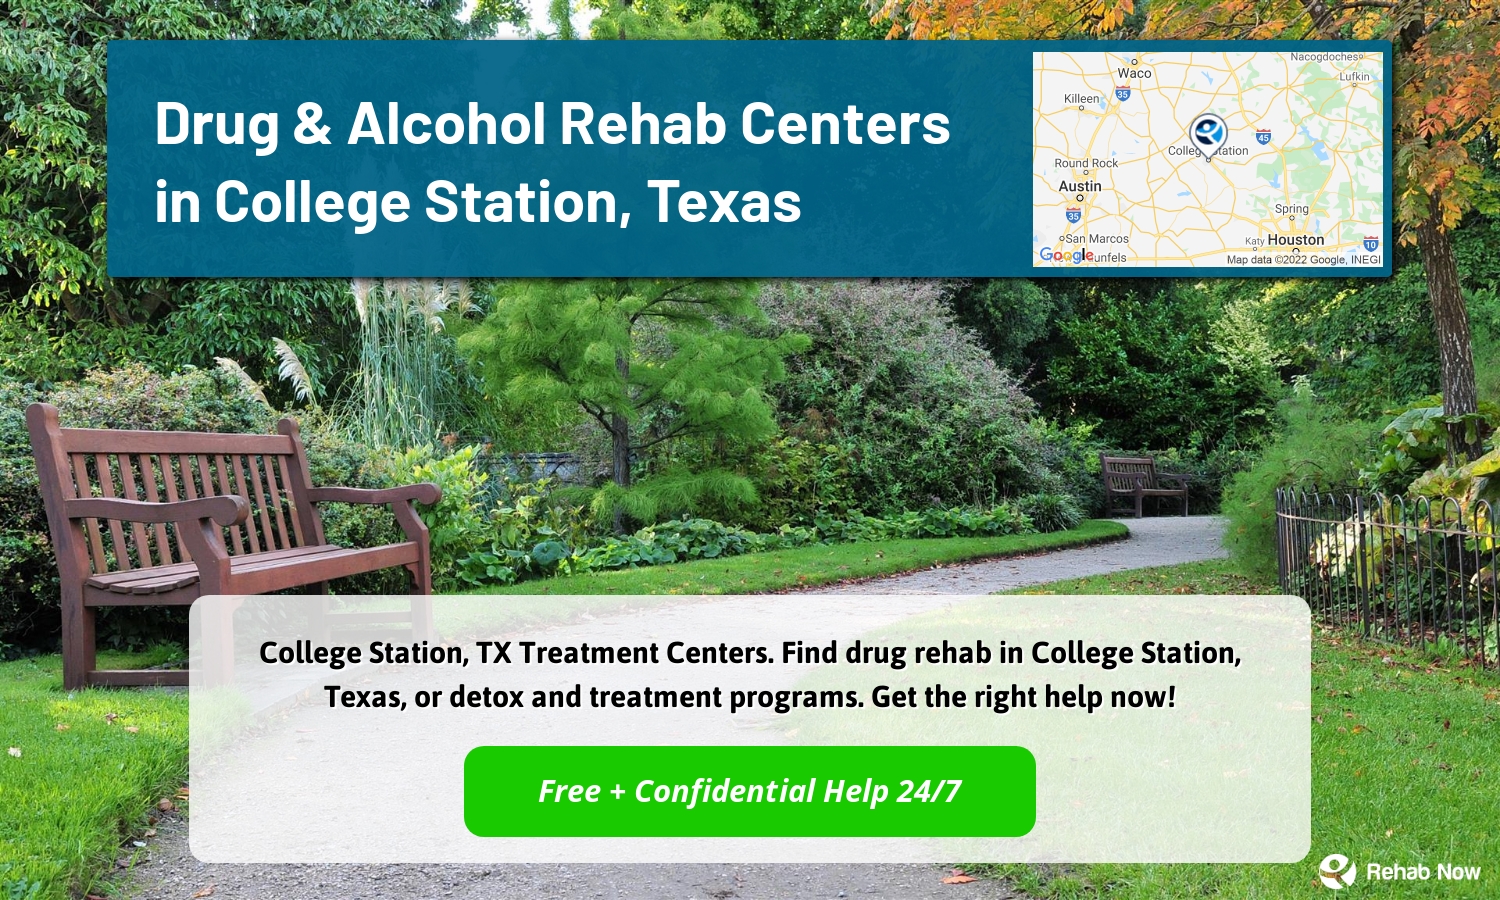 College Station, TX Treatment Centers. Find drug rehab in College Station, Texas, or detox and treatment programs. Get the right help now!